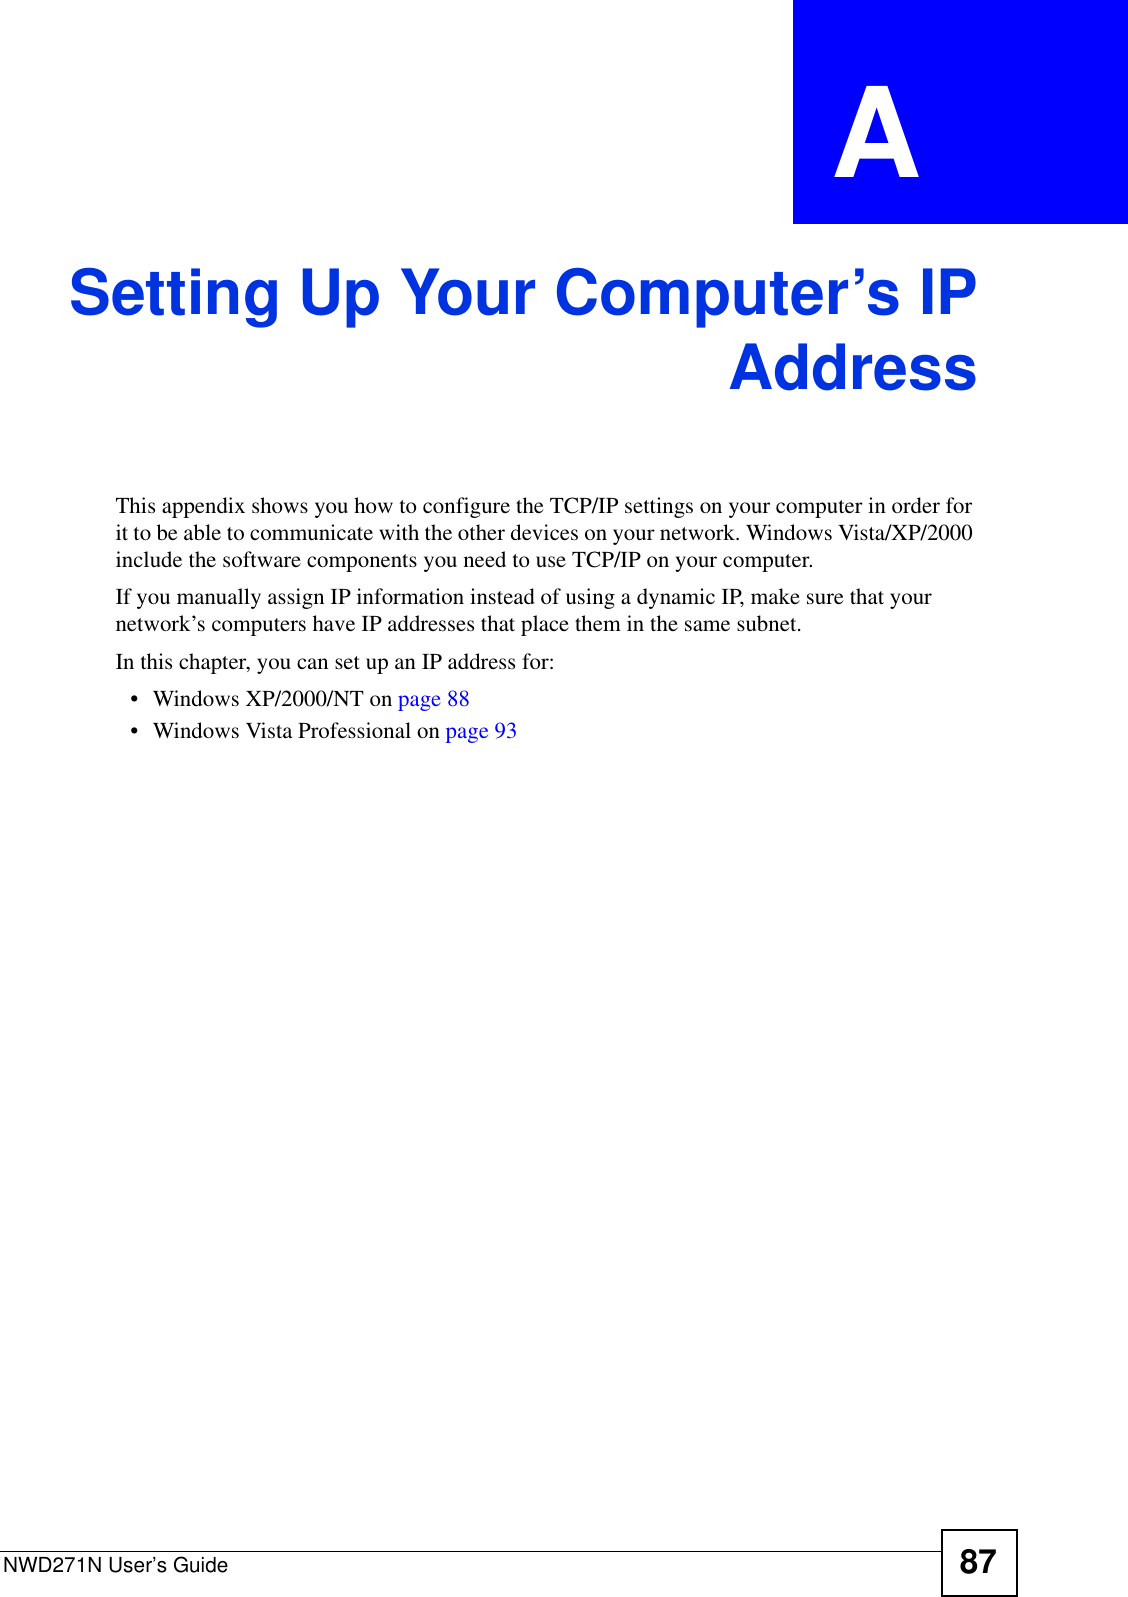 NWD271N User’s Guide 87APPENDIX  A Setting Up Your Computer’s IPAddressThis appendix shows you how to configure the TCP/IP settings on your computer in order for it to be able to communicate with the other devices on your network. Windows Vista/XP/2000 include the software components you need to use TCP/IP on your computer. If you manually assign IP information instead of using a dynamic IP, make sure that your network’s computers have IP addresses that place them in the same subnet. In this chapter, you can set up an IP address for:• Windows XP/2000/NT on page 88• Windows Vista Professional on page 93